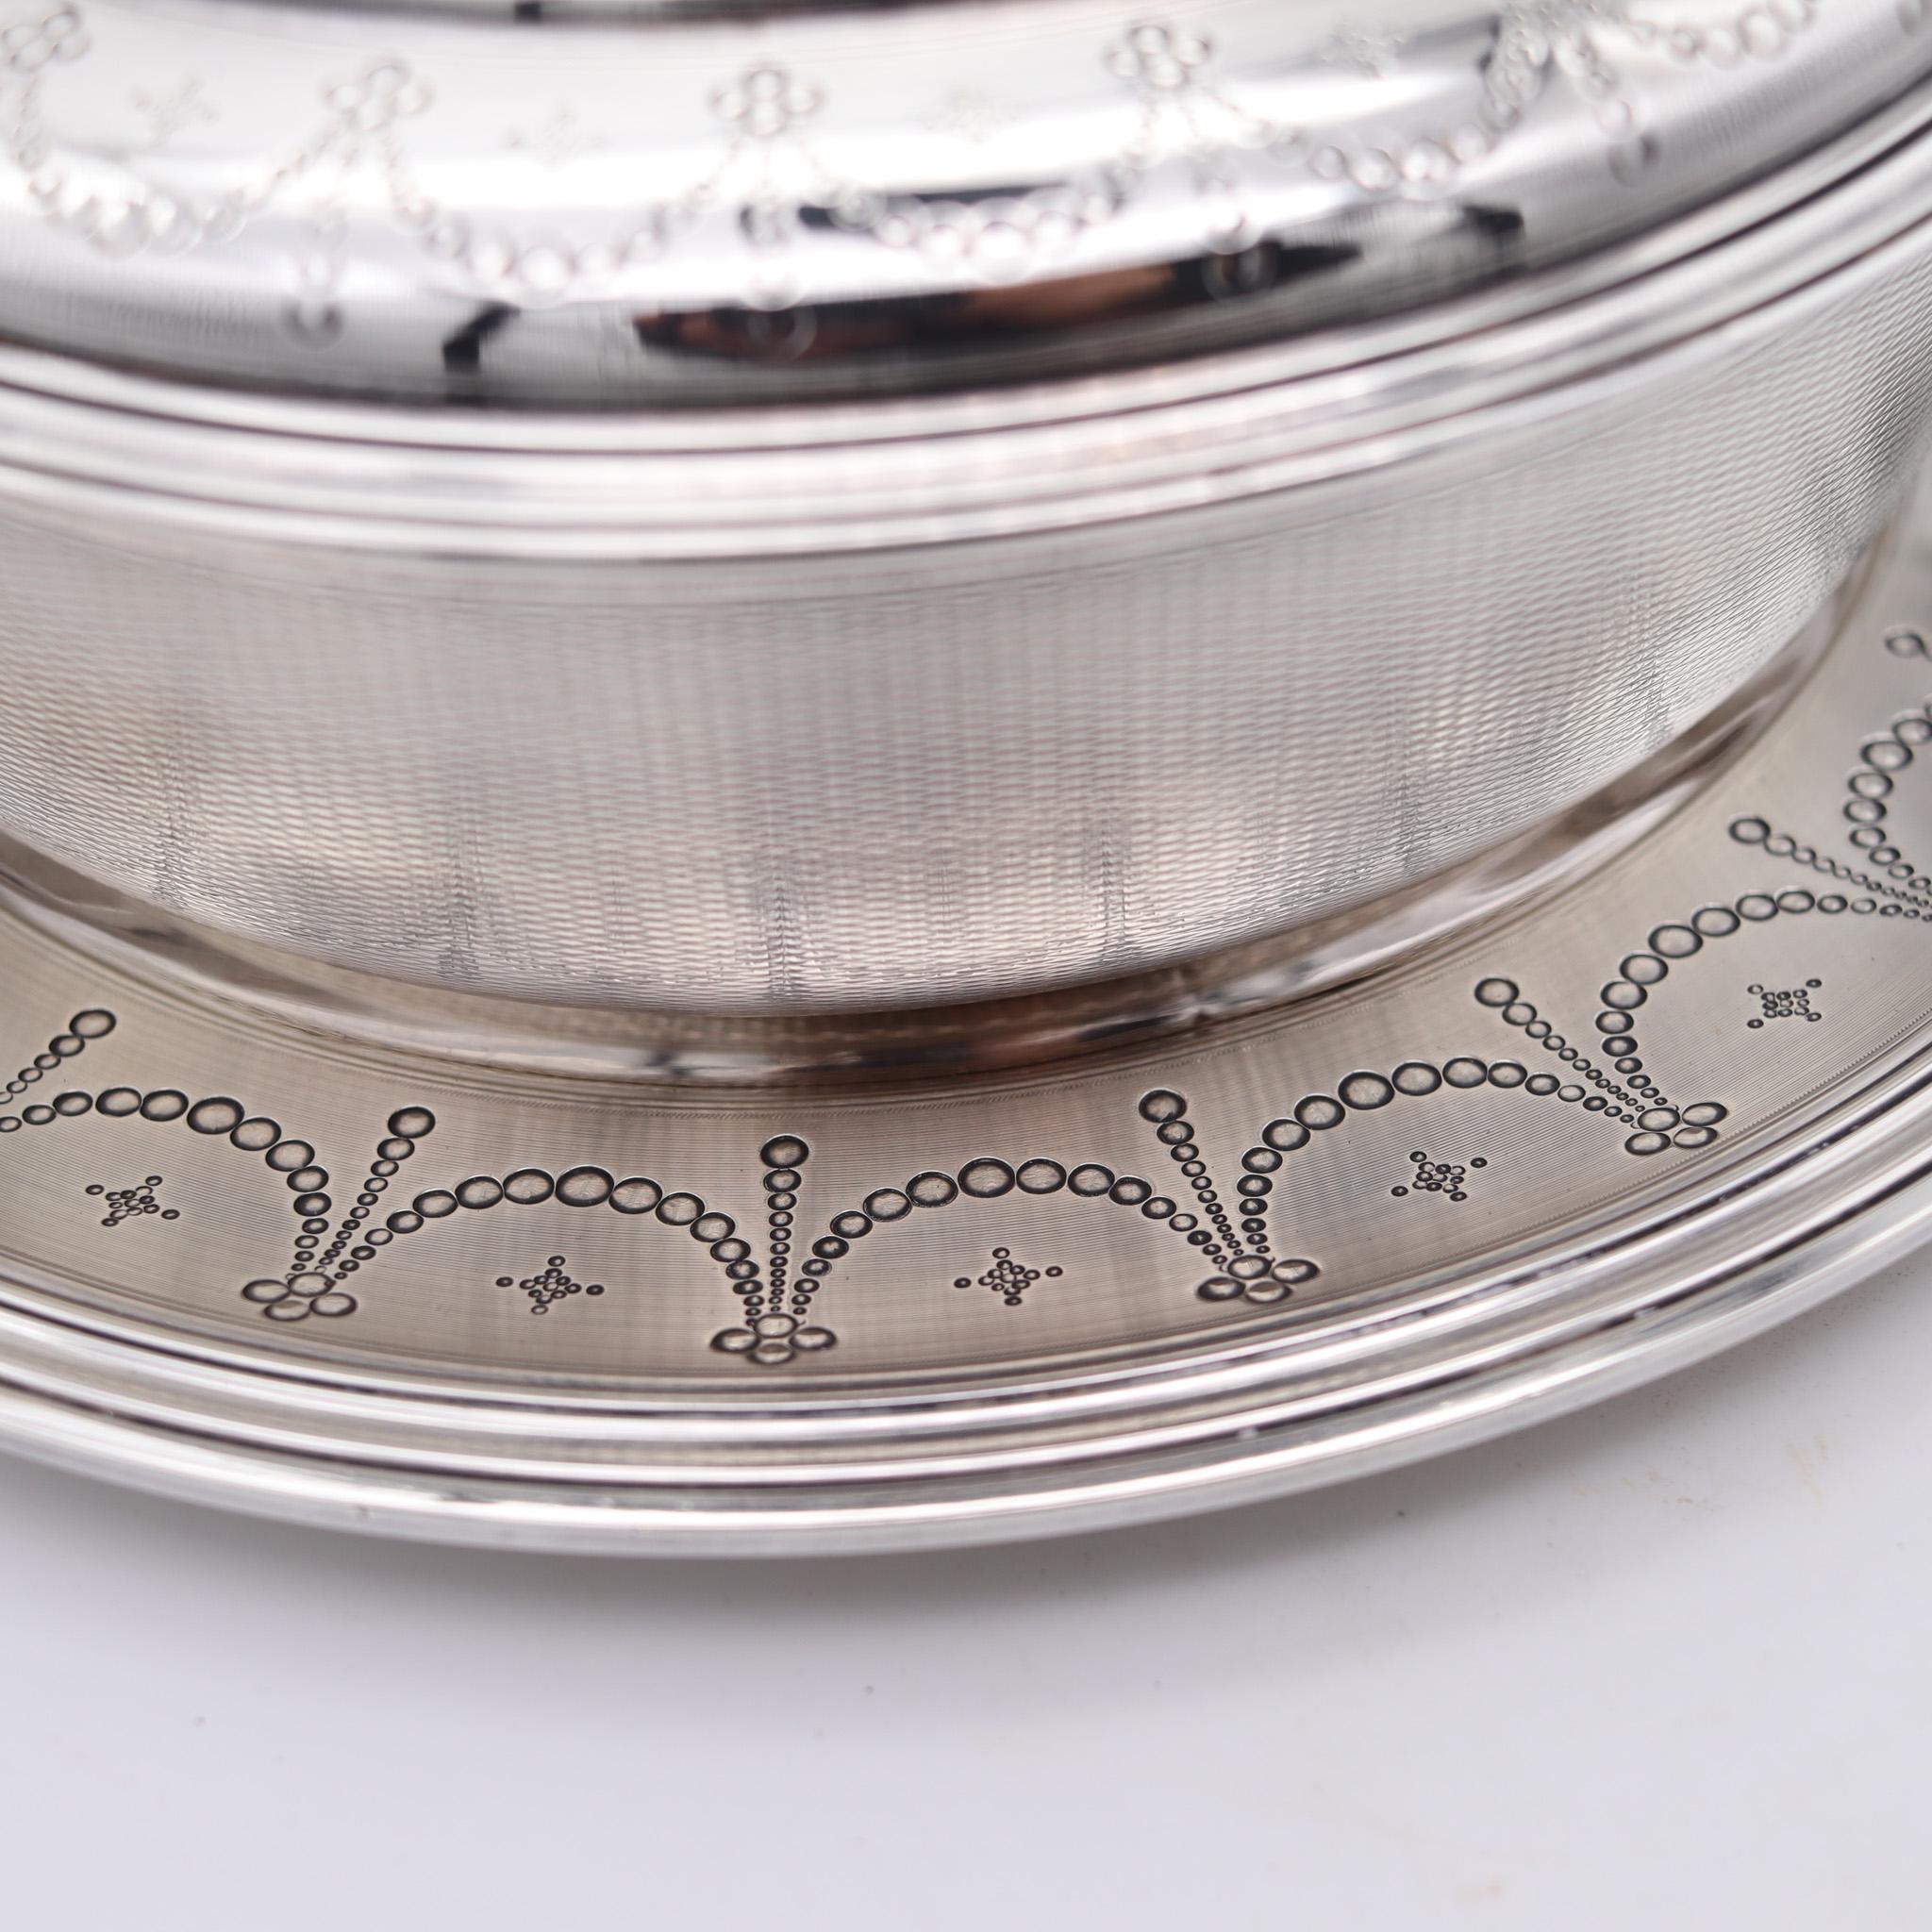 Tallois & Mayence 1885 Paris Covered Dish With Plate In .950 Sterling Silver For Sale 3